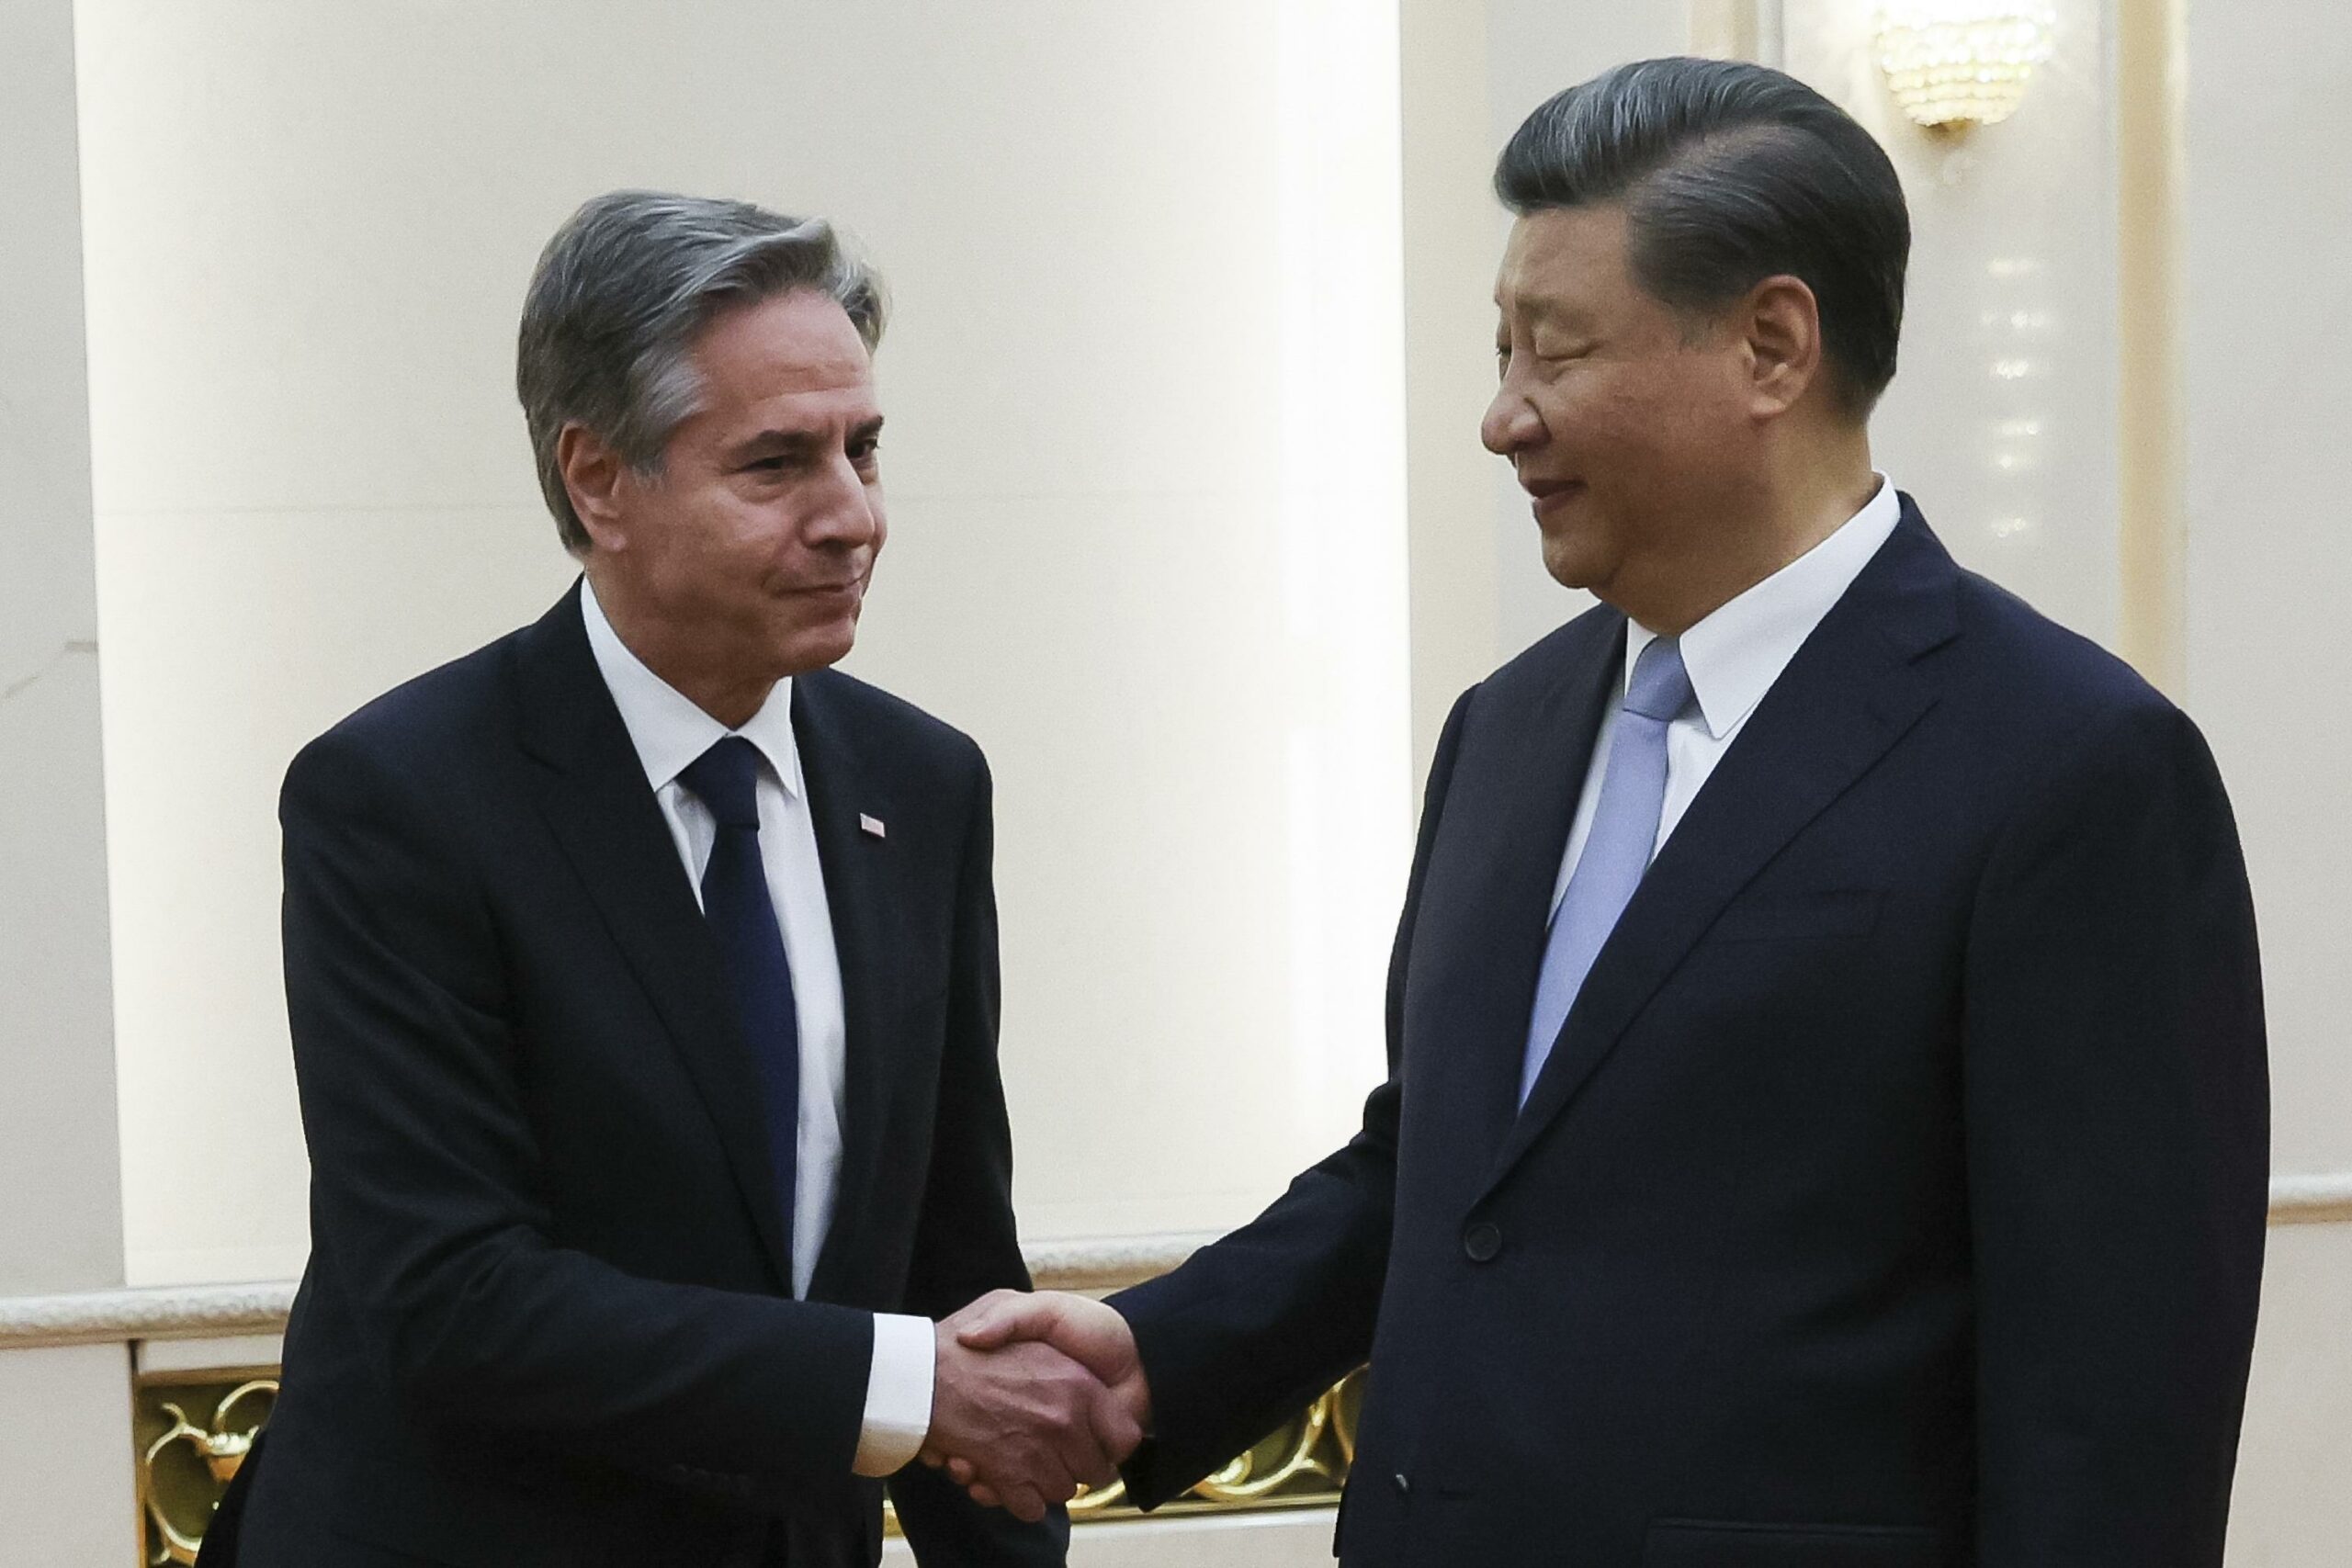 Blinken and Xi pledge to stabilize deteriorated US-China ties…